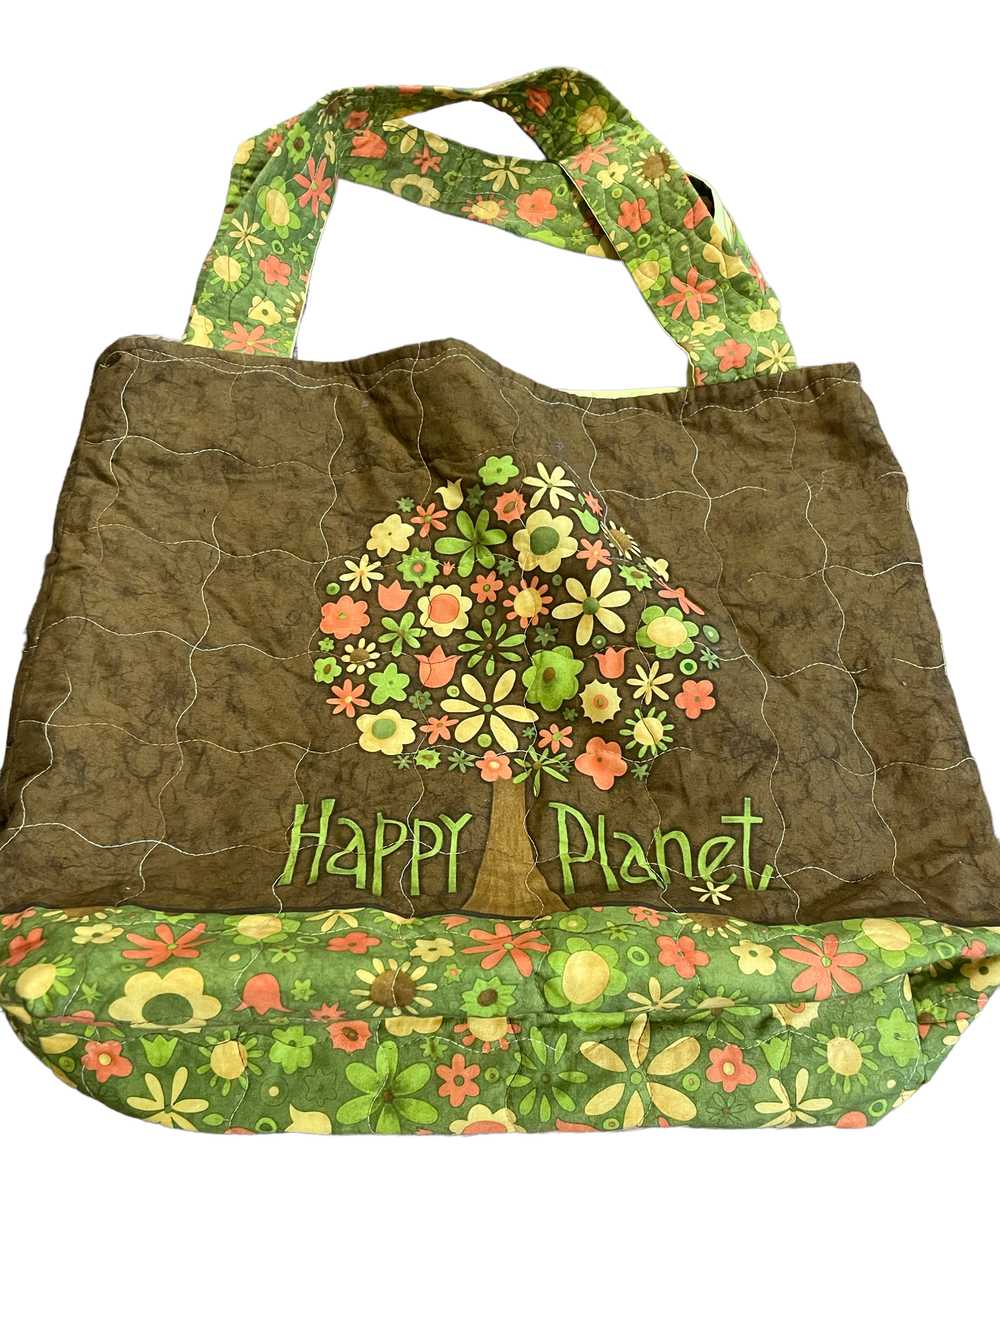 Happy Planet” handmade / homemade open top tote - image 2